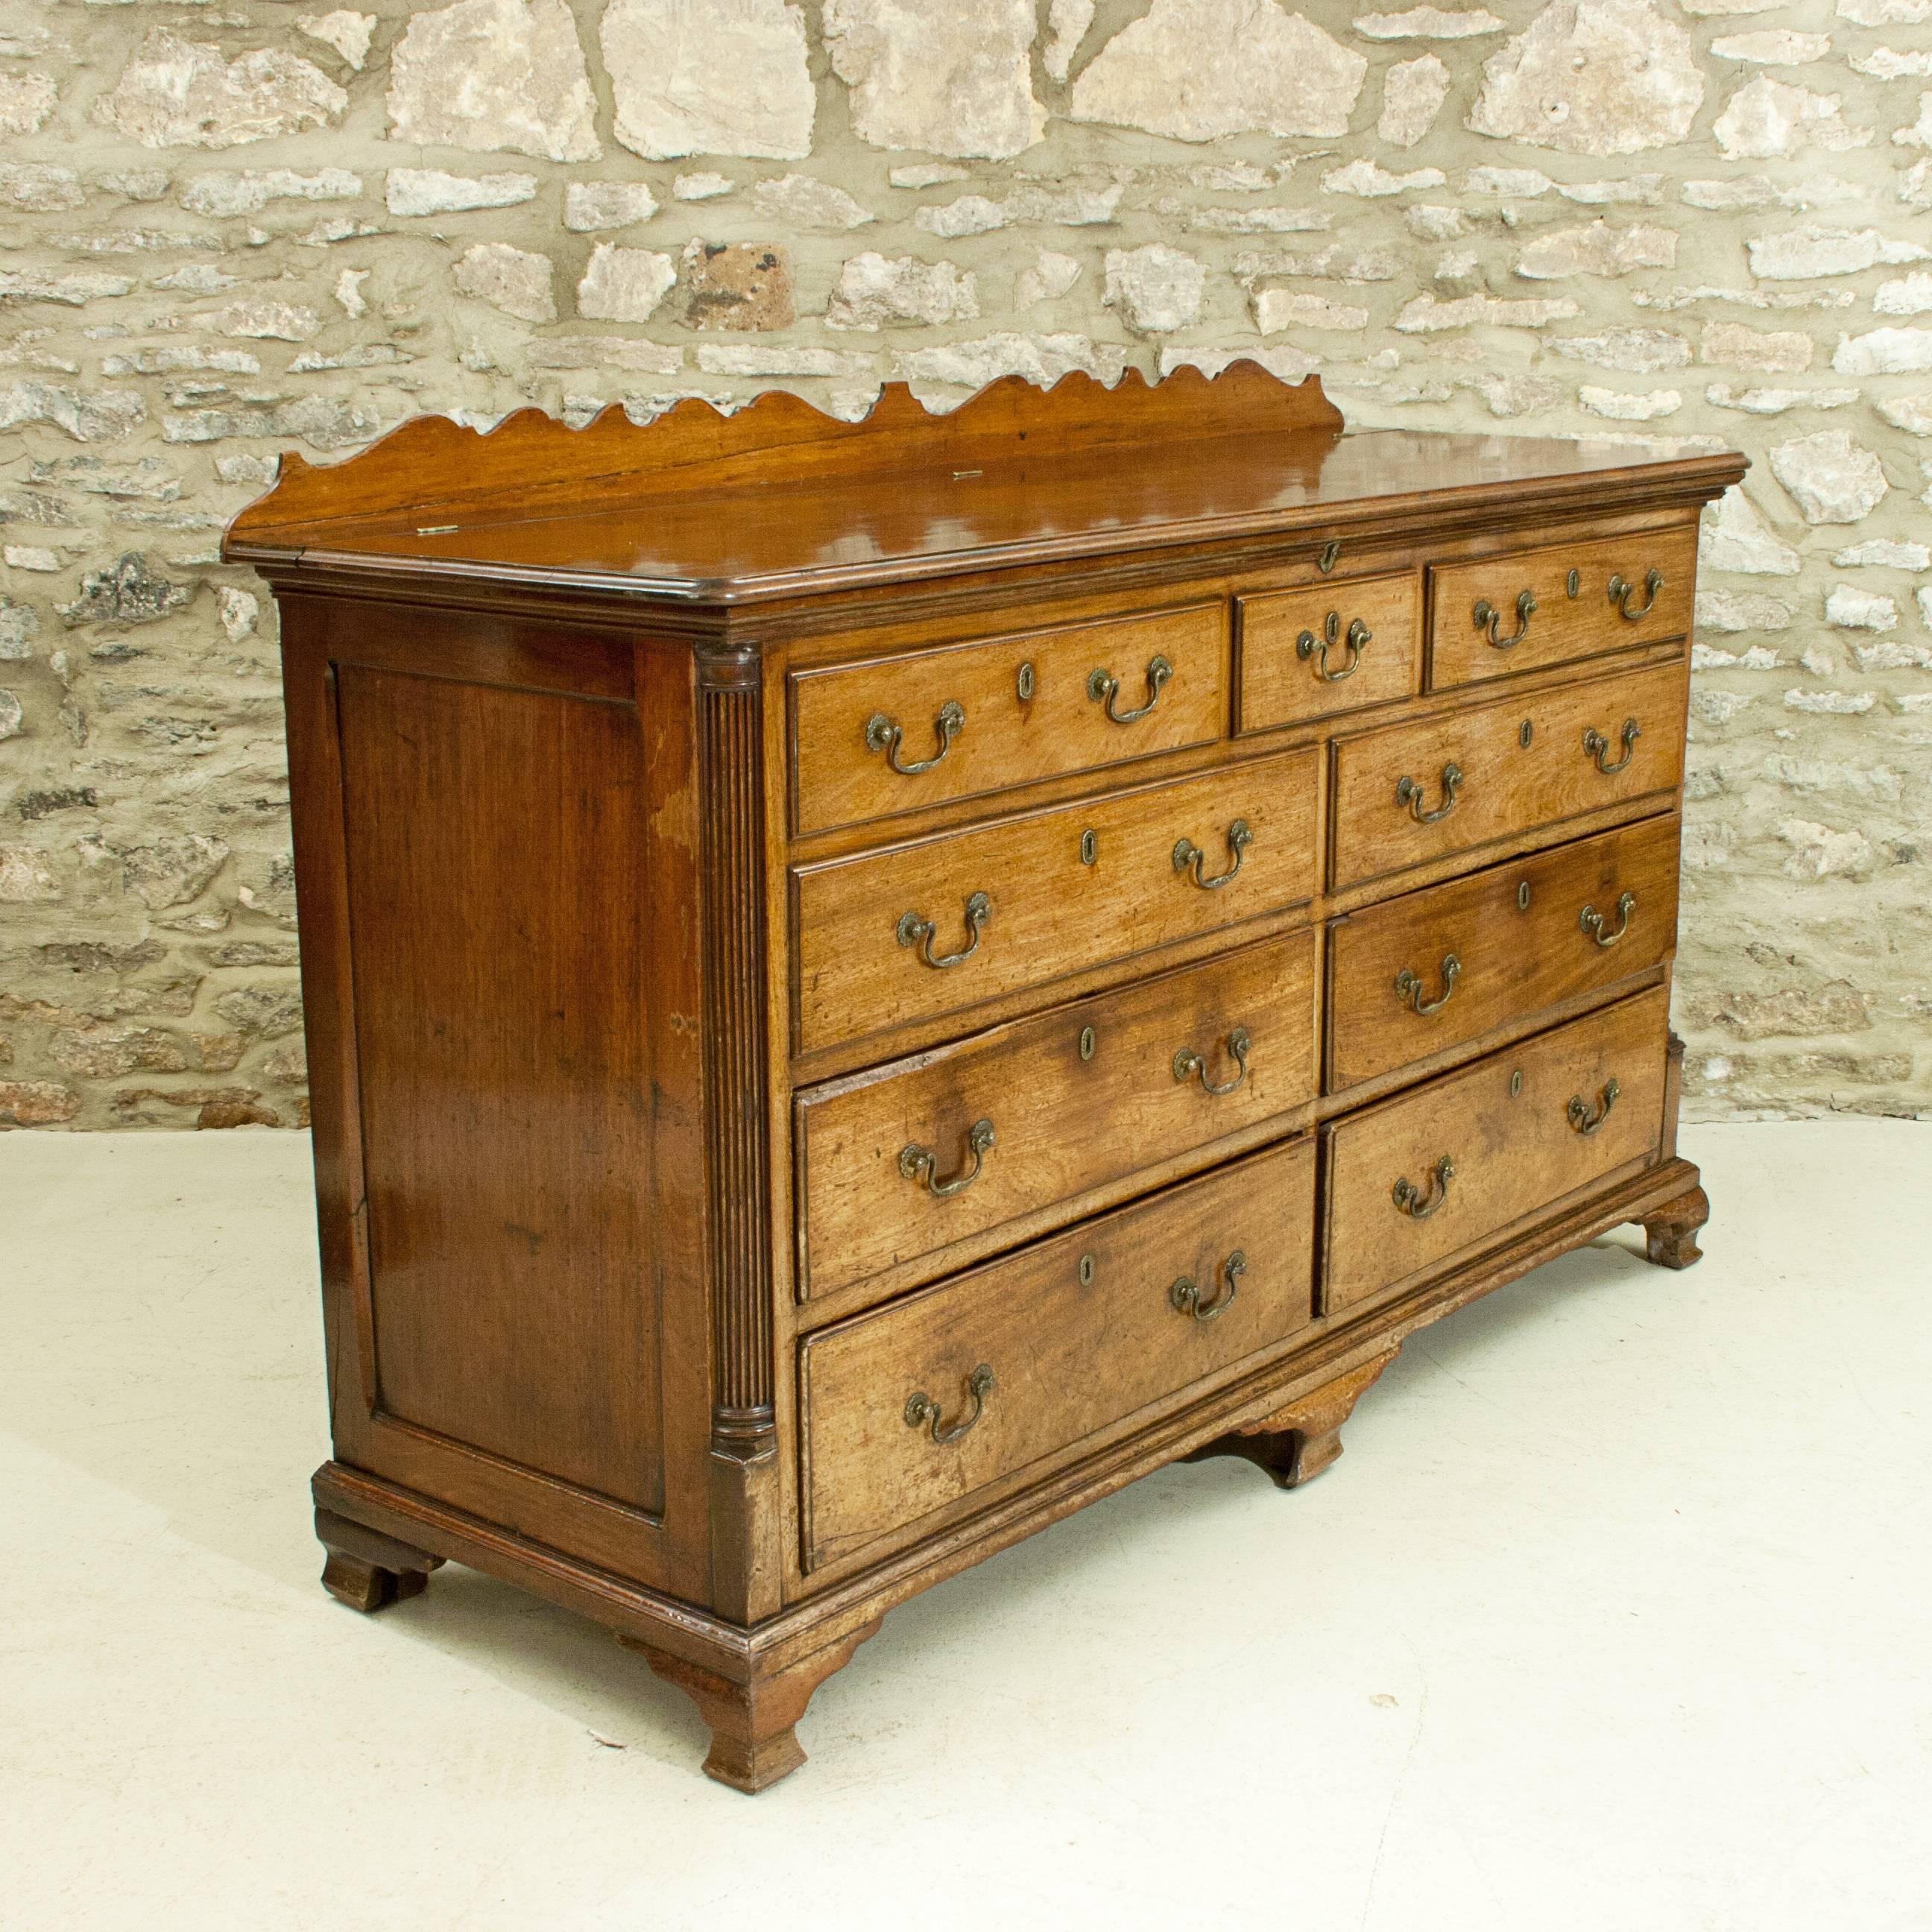 Lancashire Mule chest.
A George III Lancashire mule chest made of mahogany. The back board with wavy edge, the first two rows of drawers (five) are false drawers, allowing a great storage area when the hinged lid is lifted. There are four real